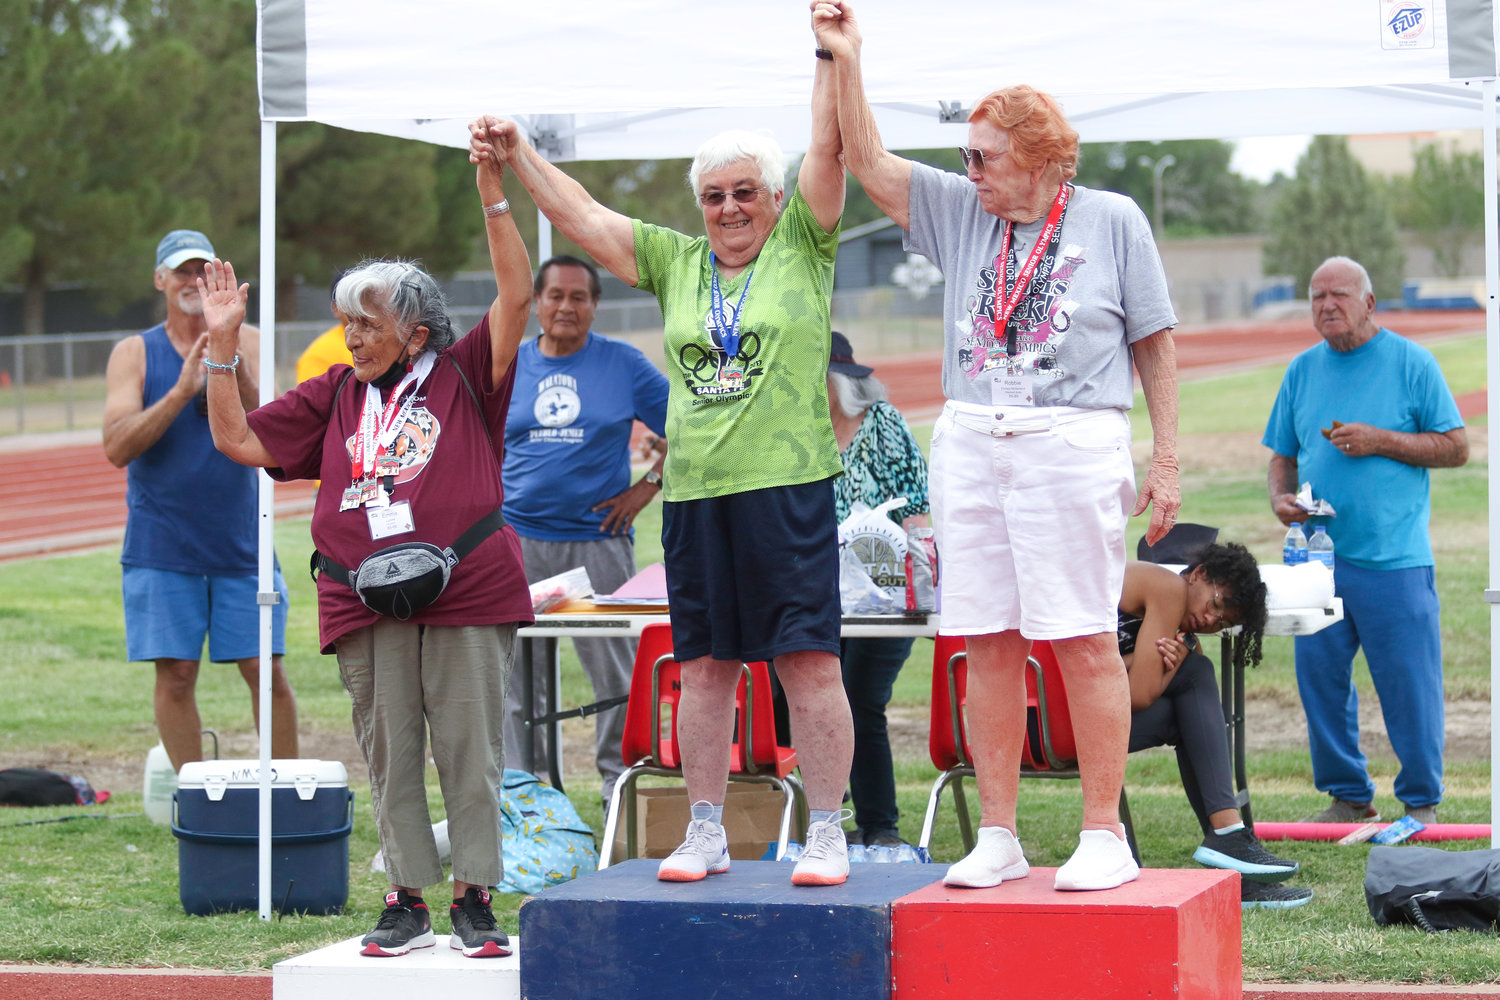 On the winner’s stand for javelin in the 85-89 age group are Ema Liptow from Acoma in third place, Barbara Hutchison of Santa Fe in first place and Robbie McFarland of Elephant Butte in second.